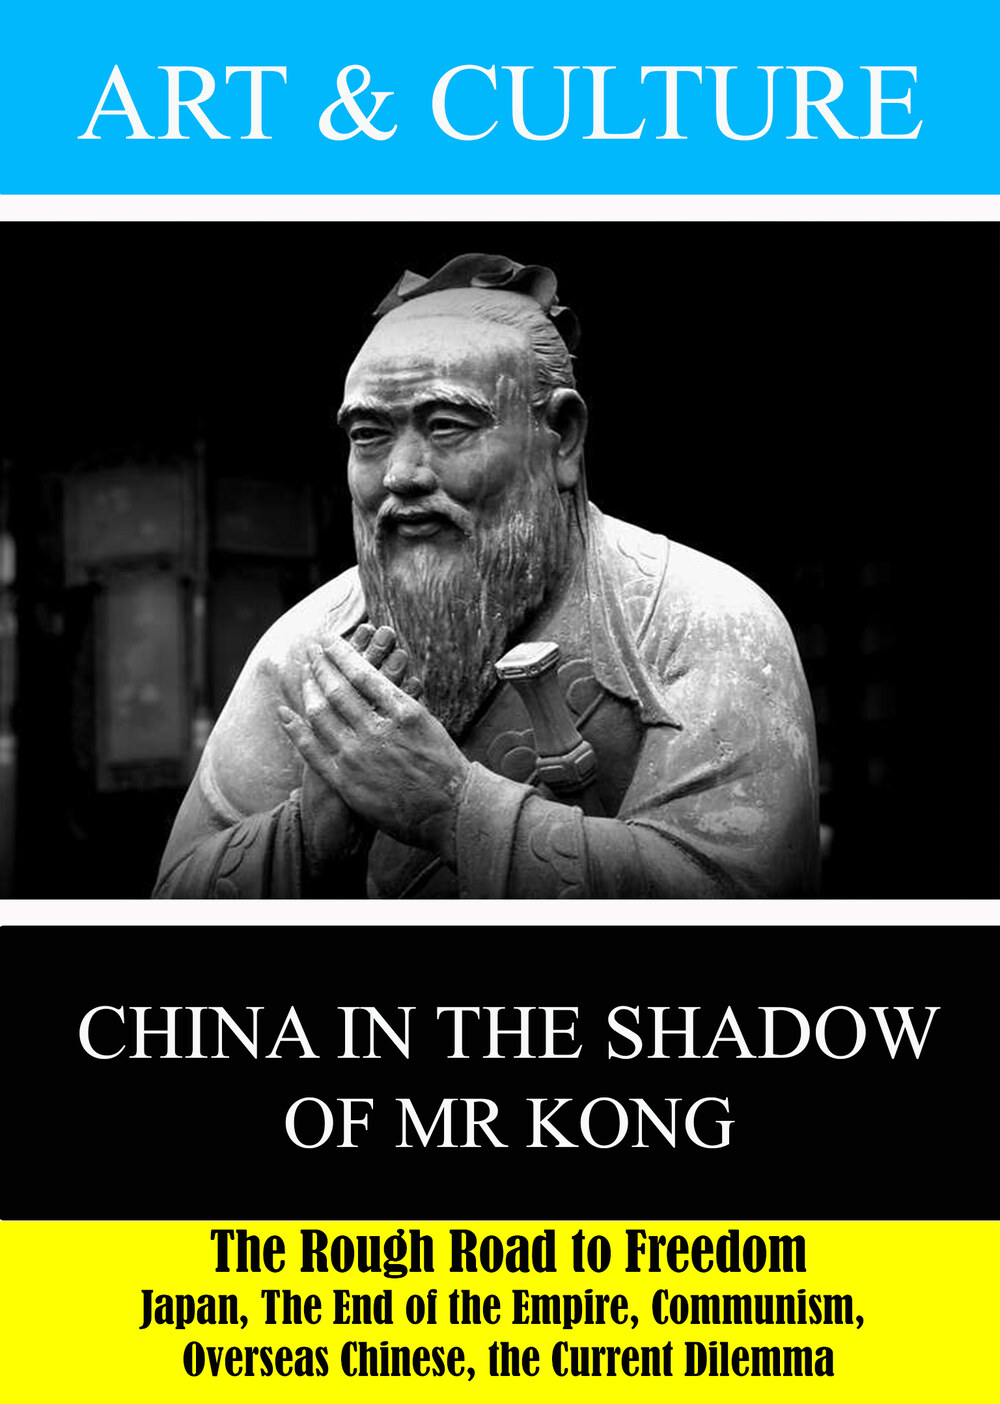 L7946 - China in the Shadow of Mr Kong - The Rough Road to Freedom: Japan,The End of the Empire, Communism, Overseas Chinese,the Current Dilemma